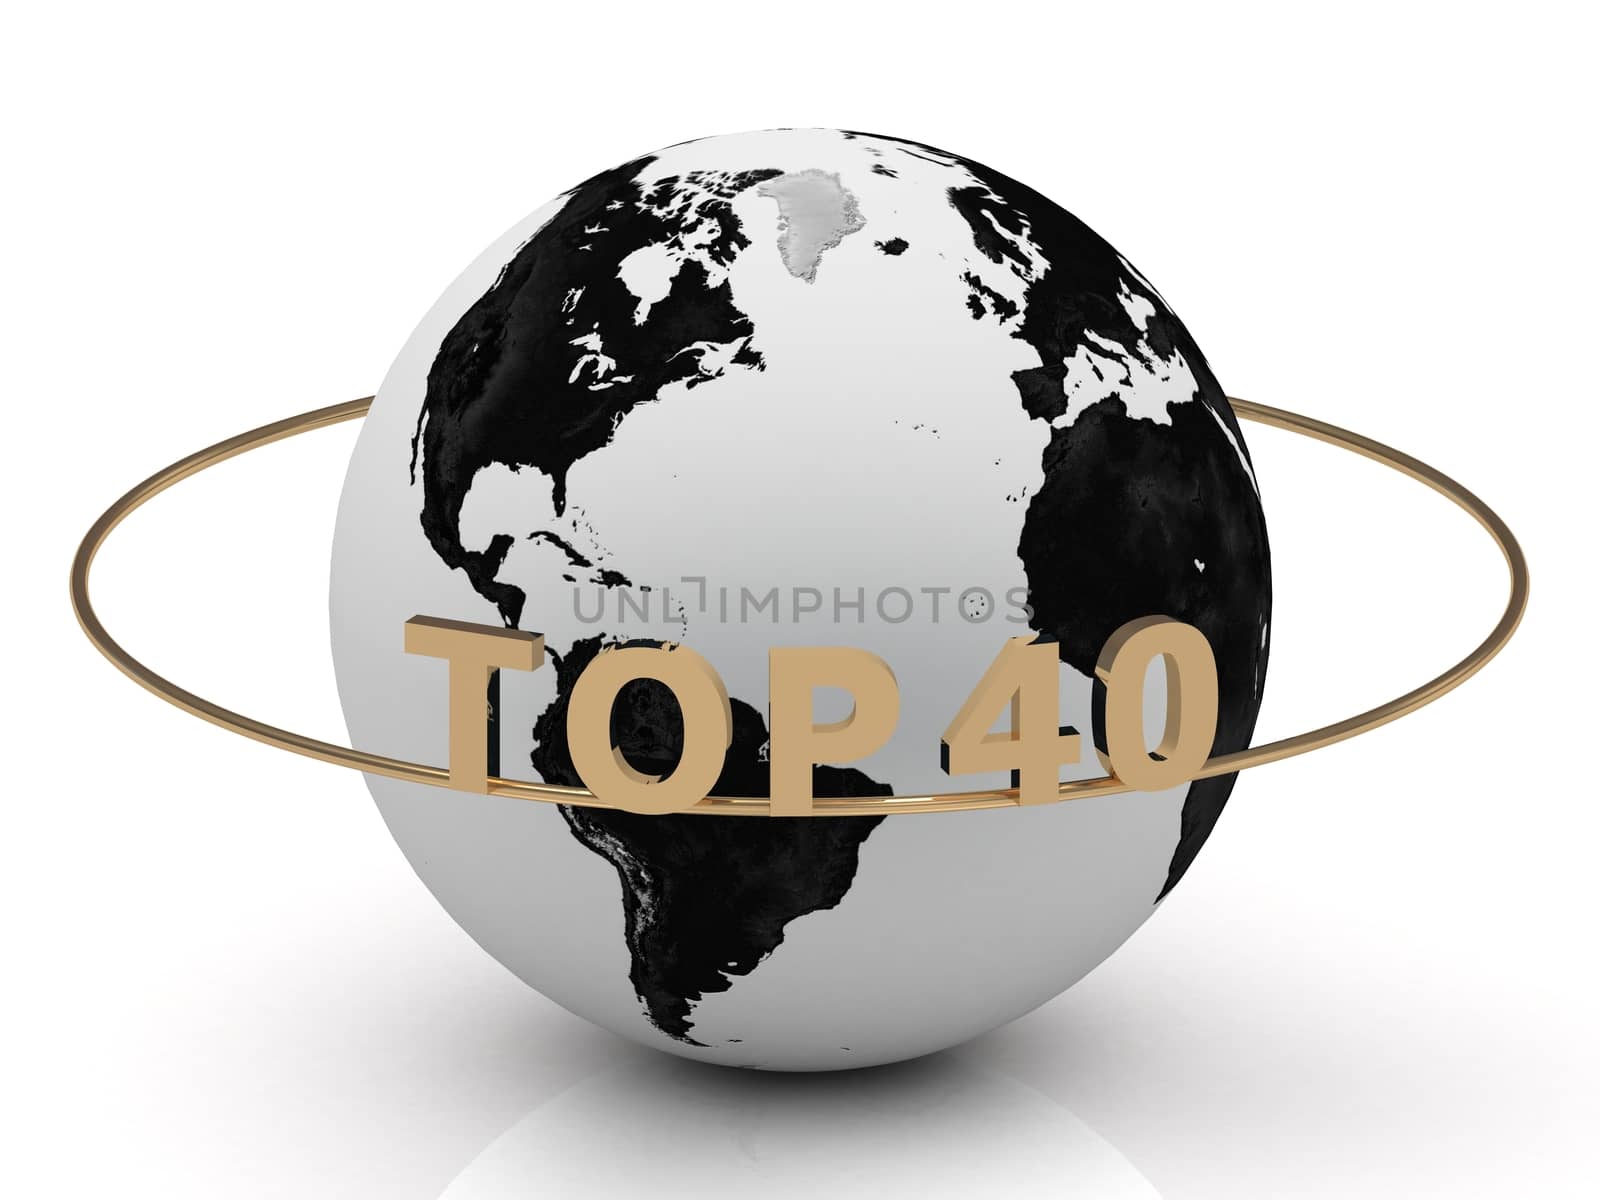 TOP40 golden letters on a gold ring around the earth on white background